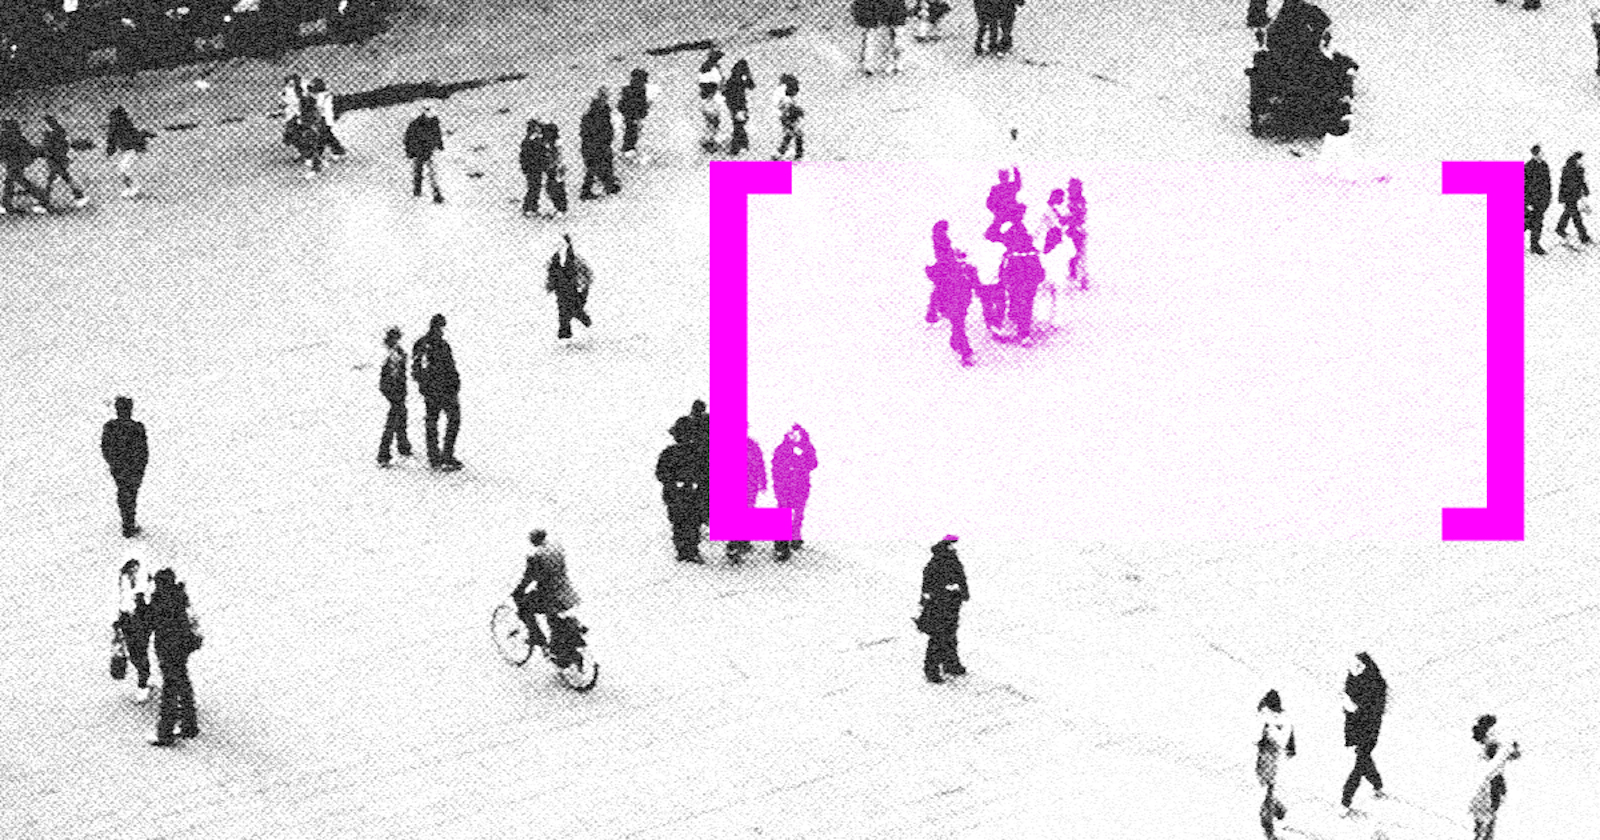 Archisearch Transforming the [re]public | An Urban Laboratory on Public Space